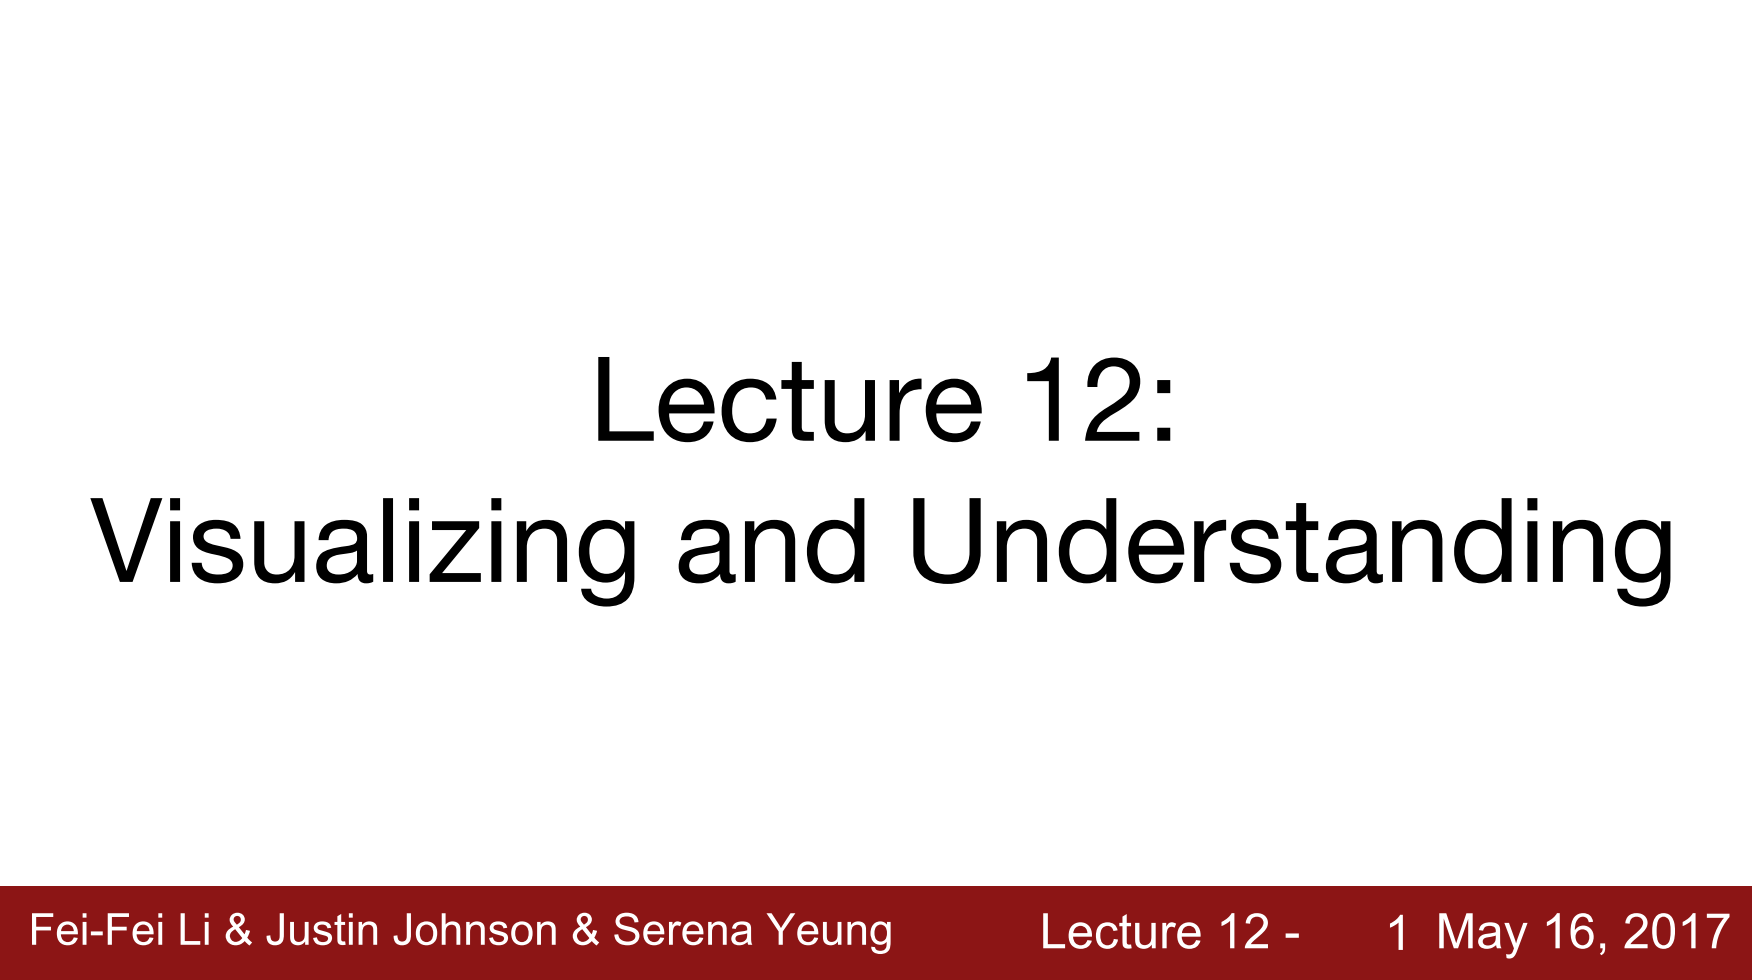 12. Visualizing and Understanding